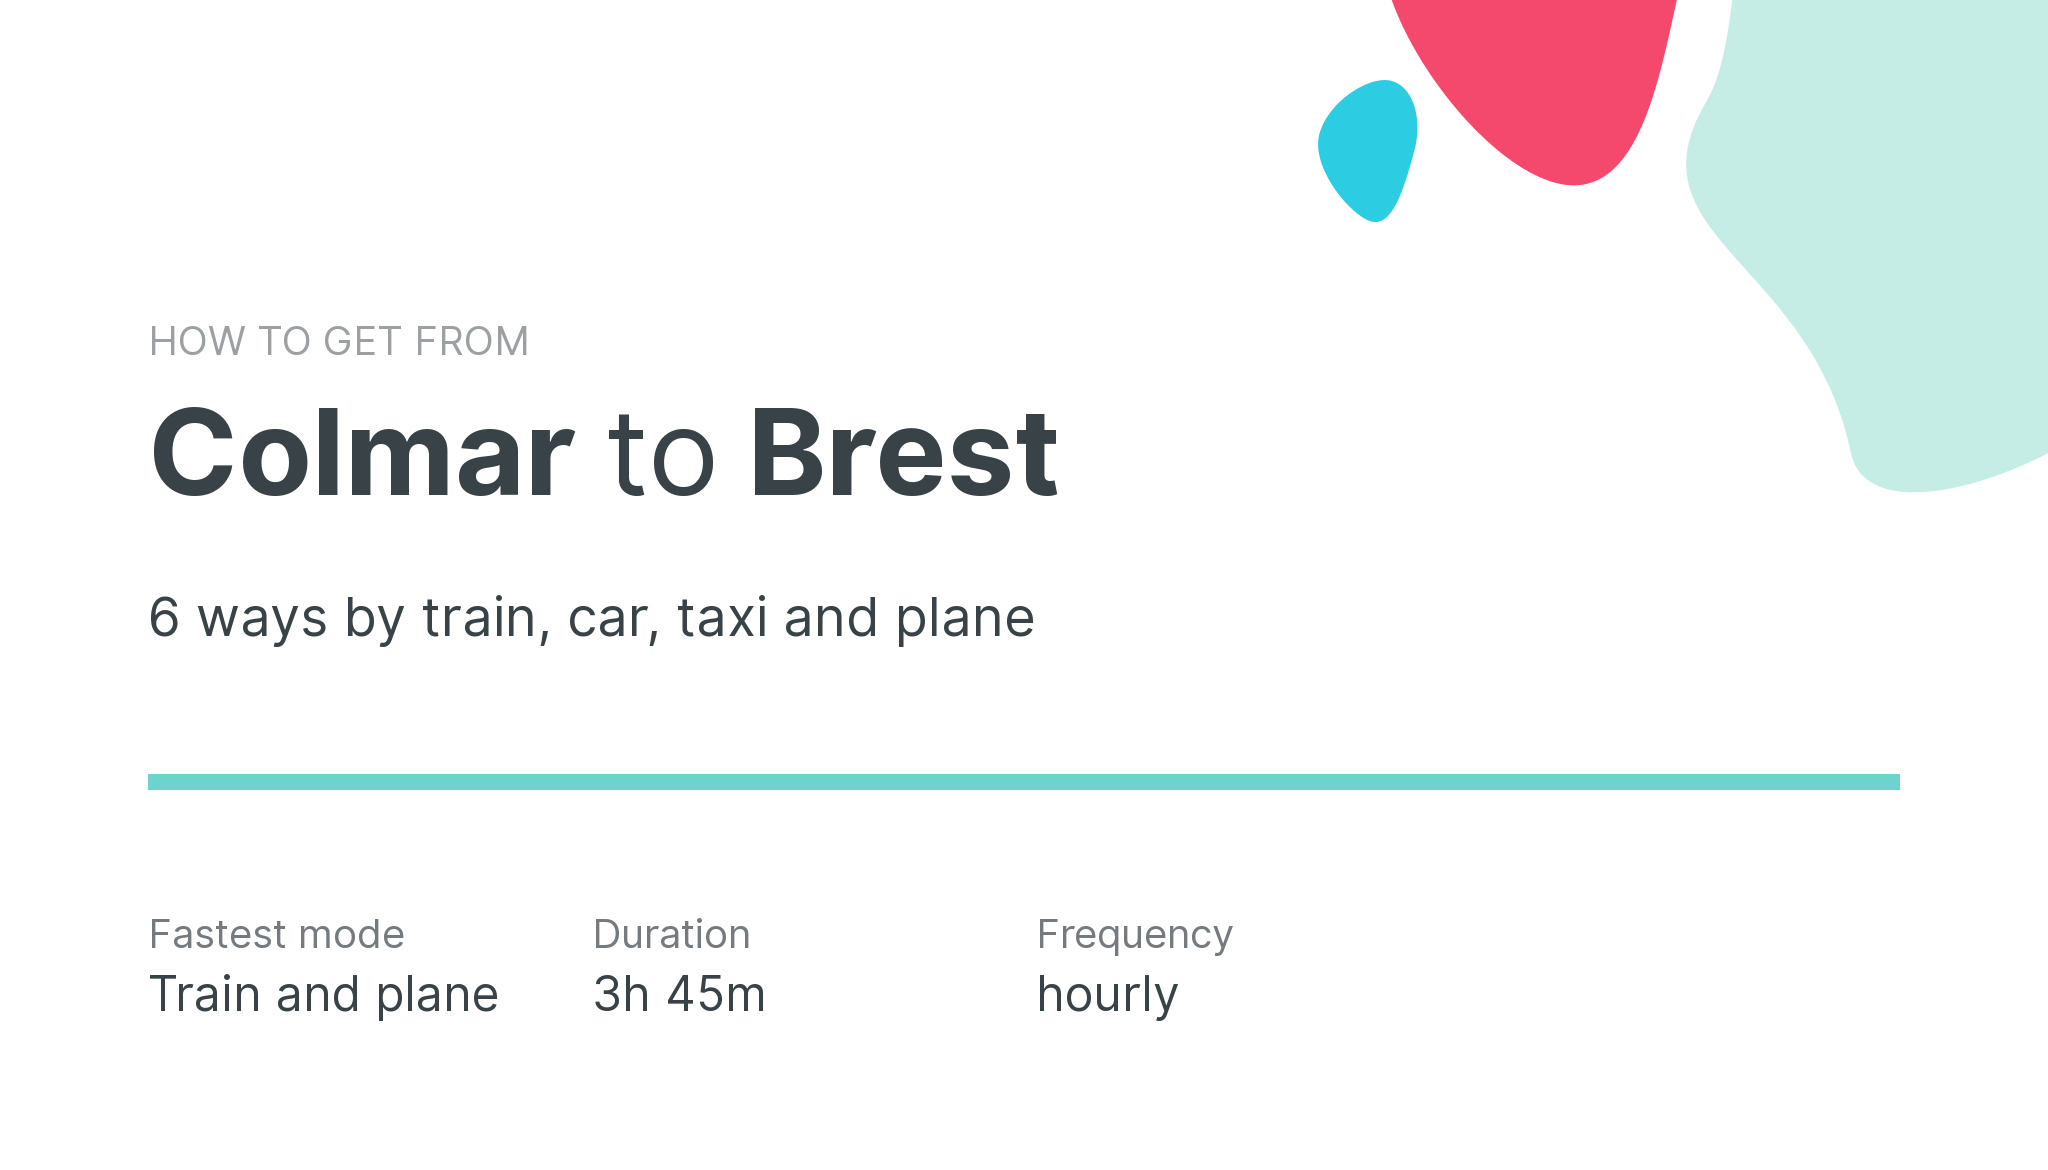 How do I get from Colmar to Brest